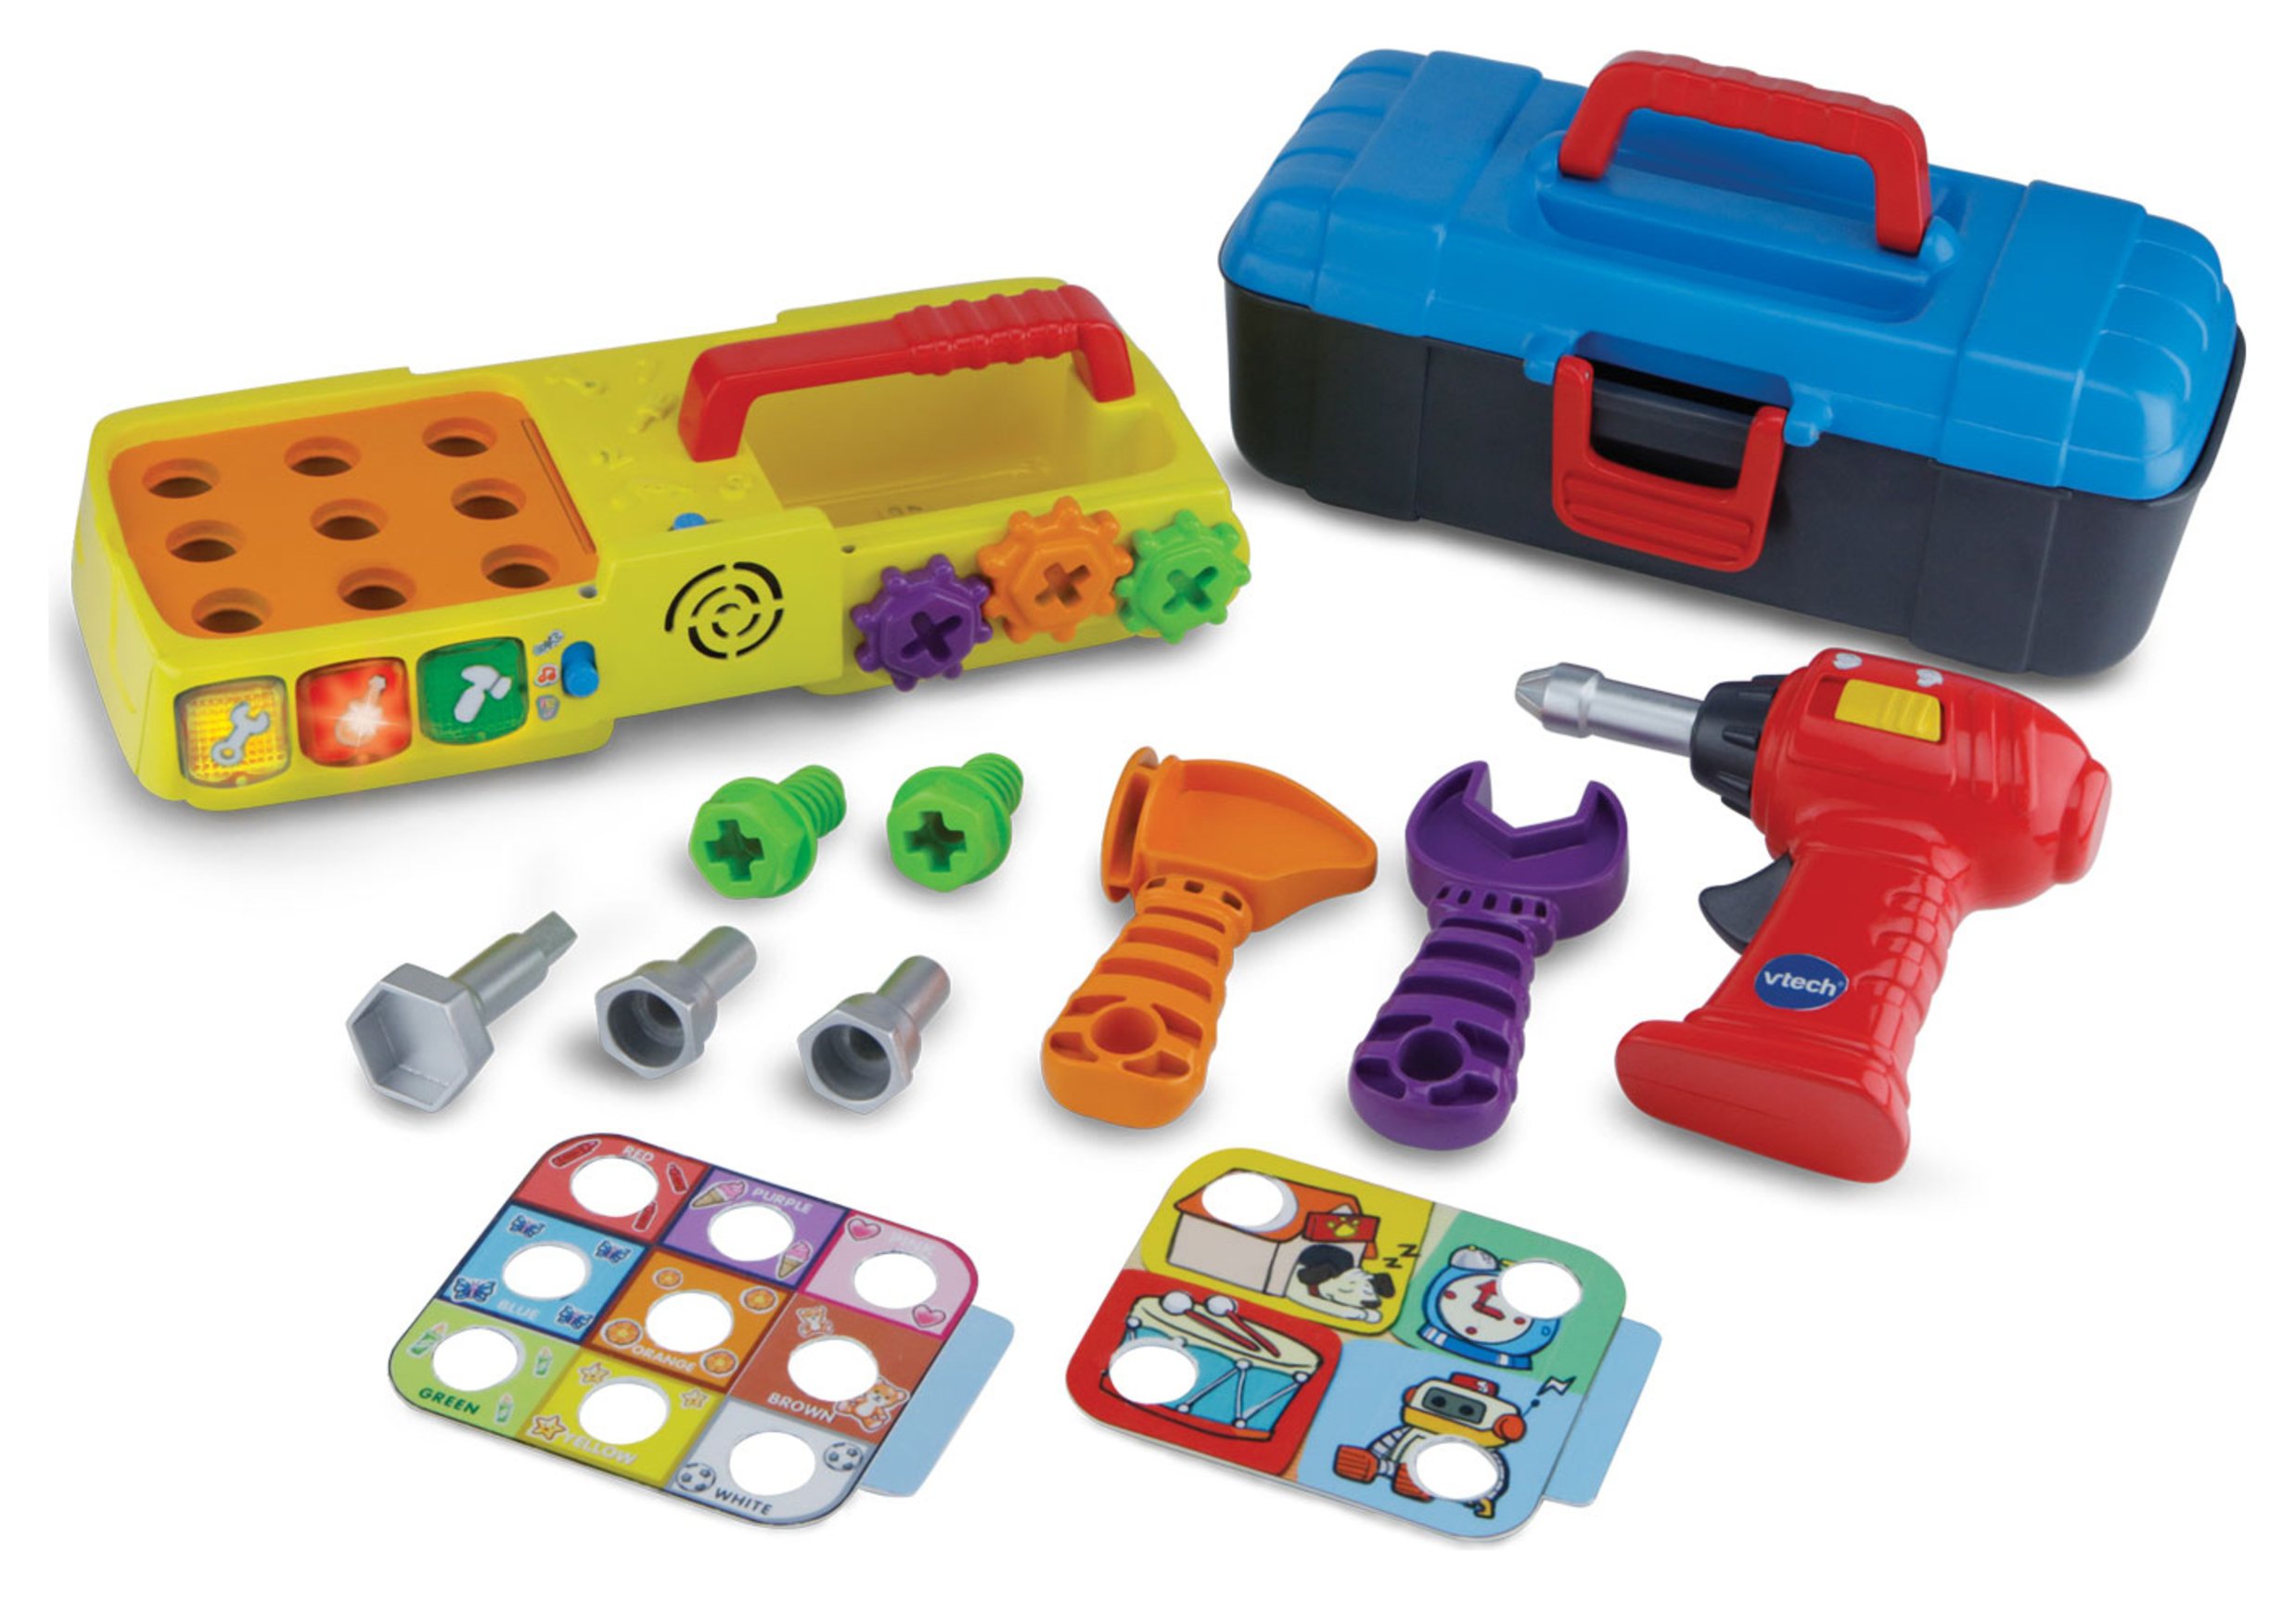 VTech - My 1st Toolbox Review